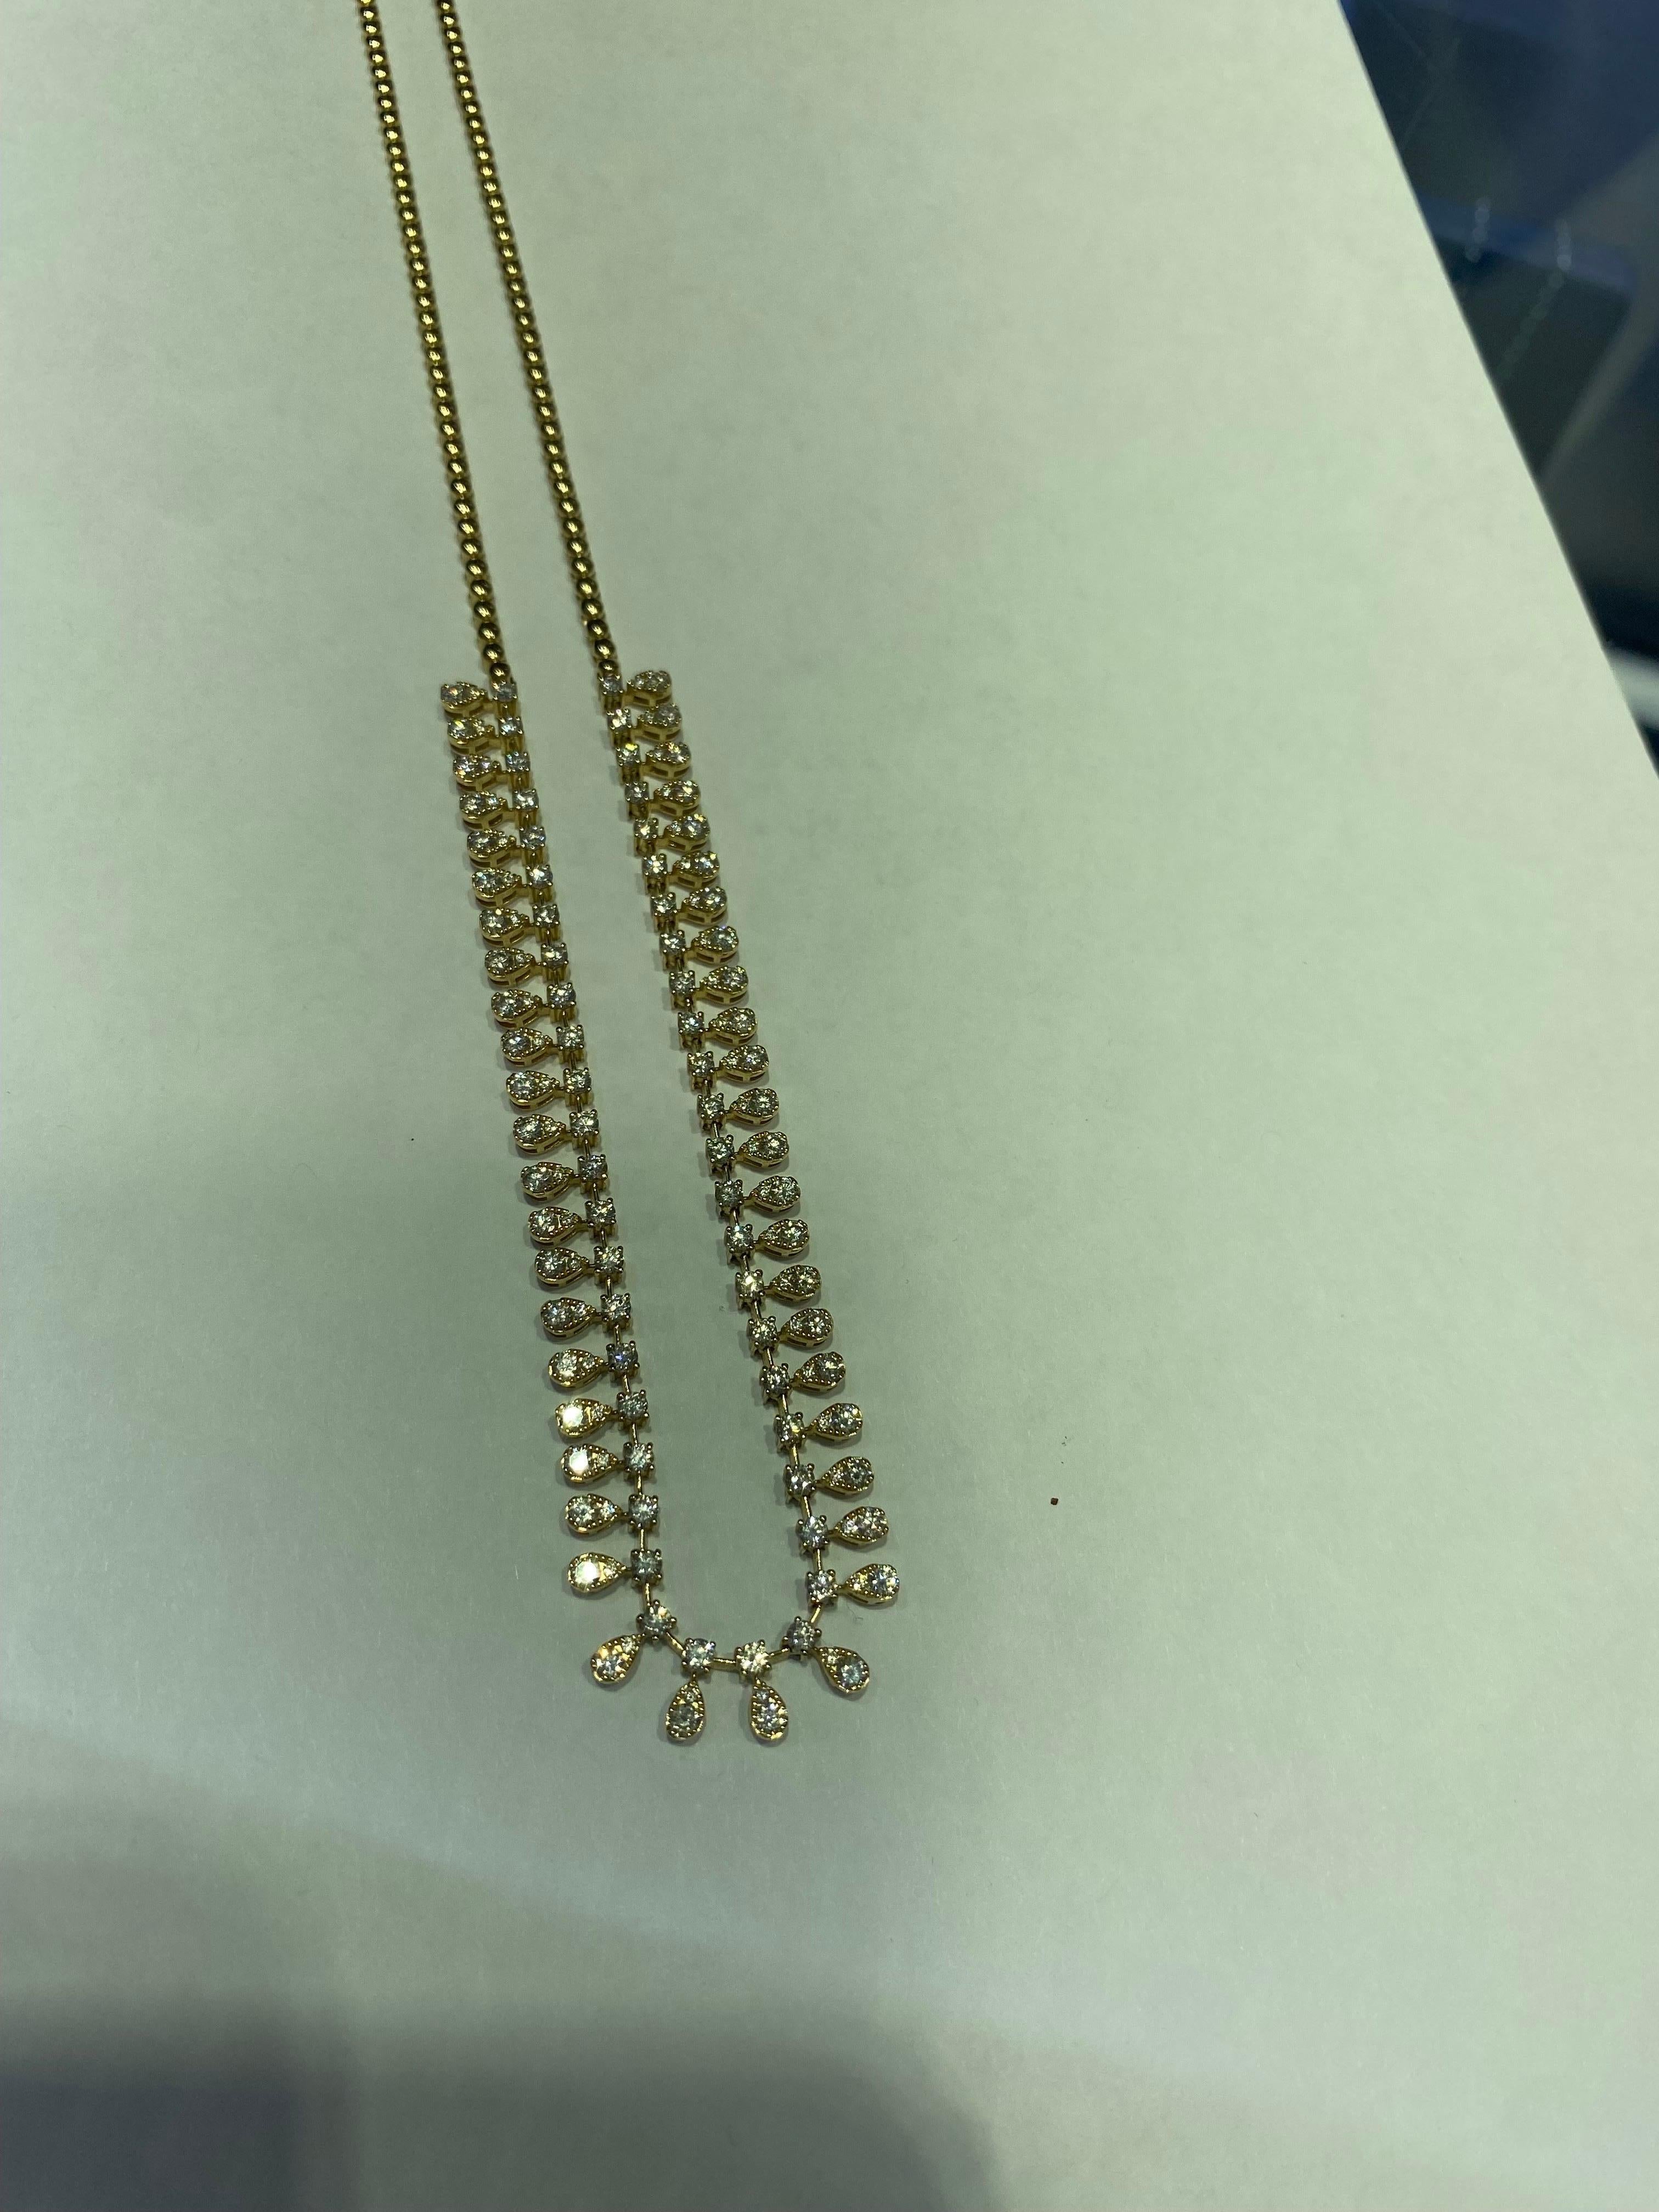 Diamond necklace set halfway in 14K yellow gold. The necklace is set with round diamonds in a pear shaped setting. The total weight is 4.26 carats. The color of the stones are G, the clarity is SI1-SI2. The necklace is 17 inches in length.